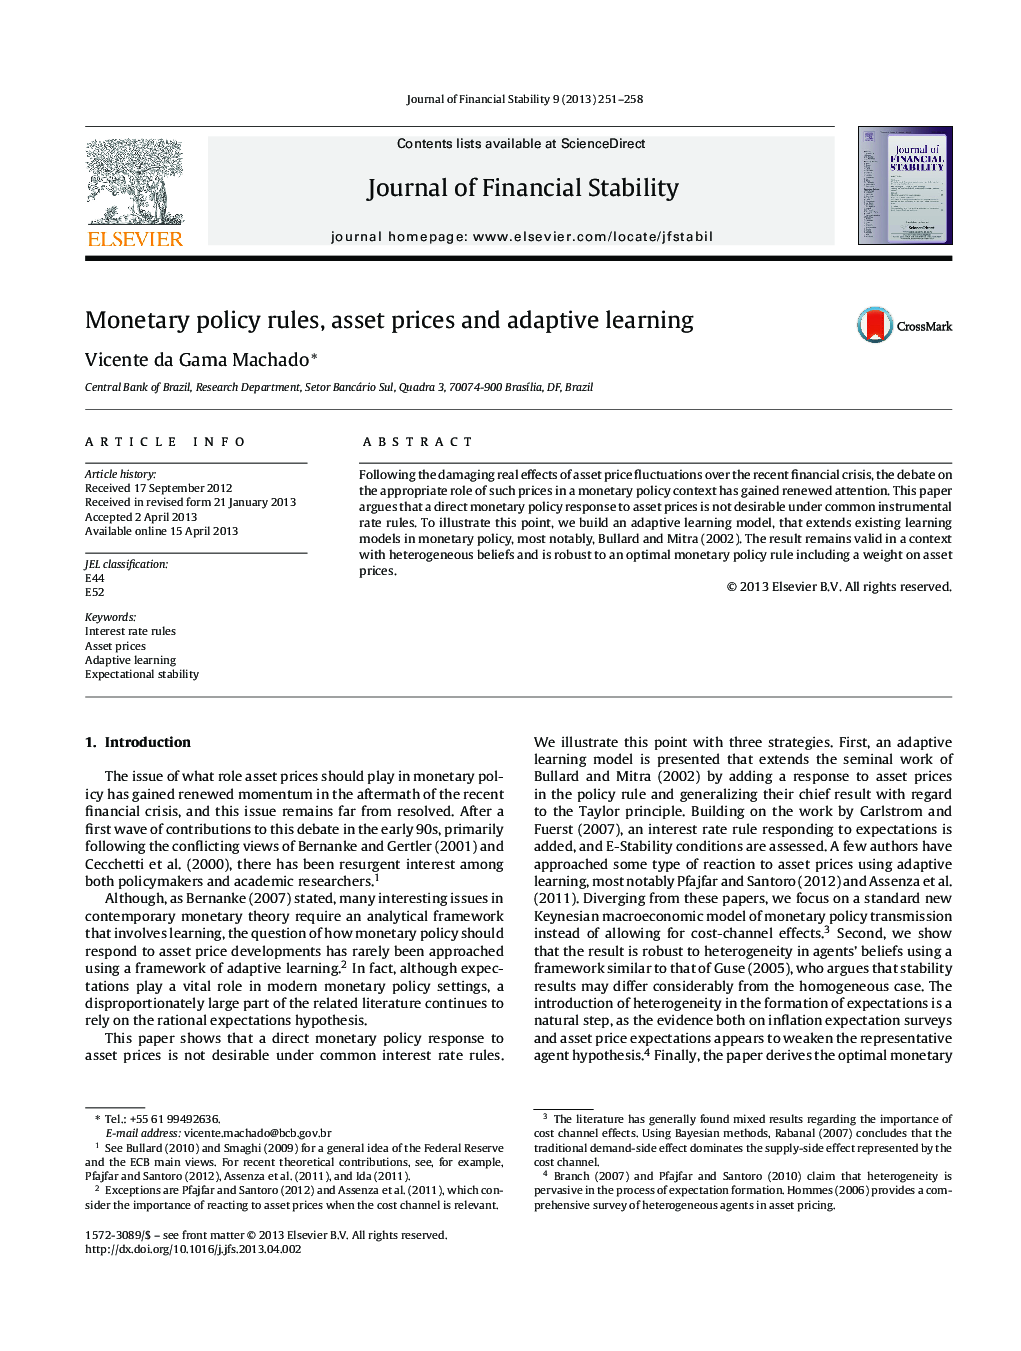 Monetary policy rules, asset prices and adaptive learning